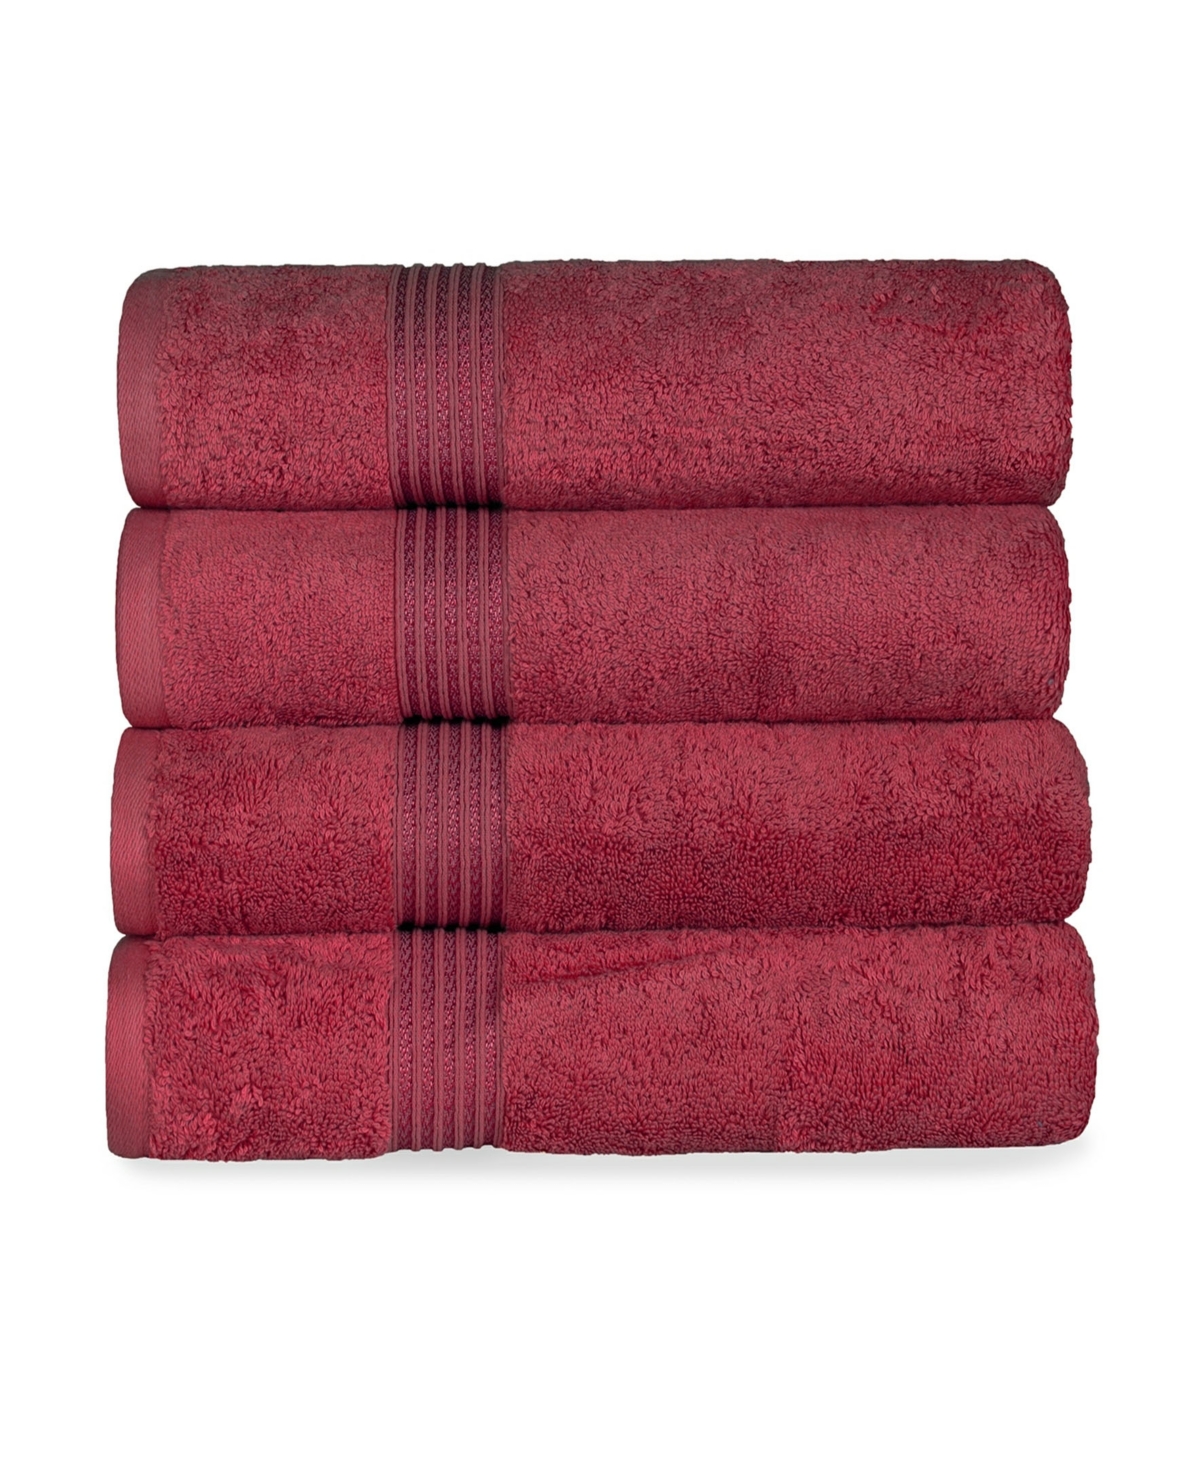 Superior Solid Quick Drying Absorbent 4 Piece Egyptian Cotton Bath Towel Set Bedding In Burgundy